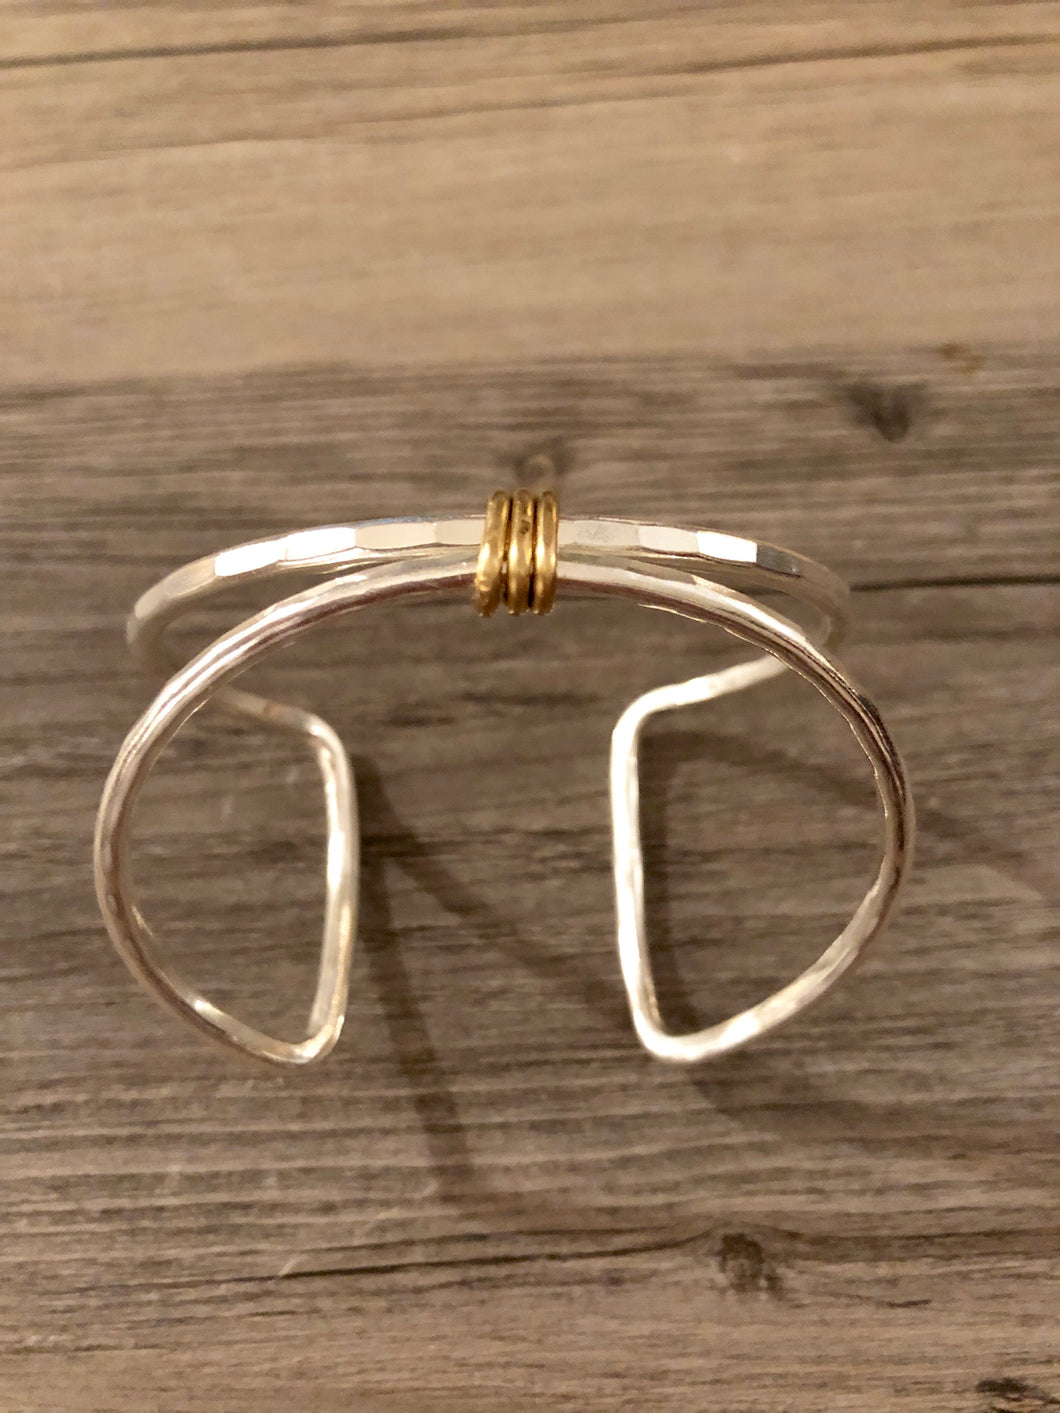 Silver Square Cuff Bracelet with Gold Center Wrap